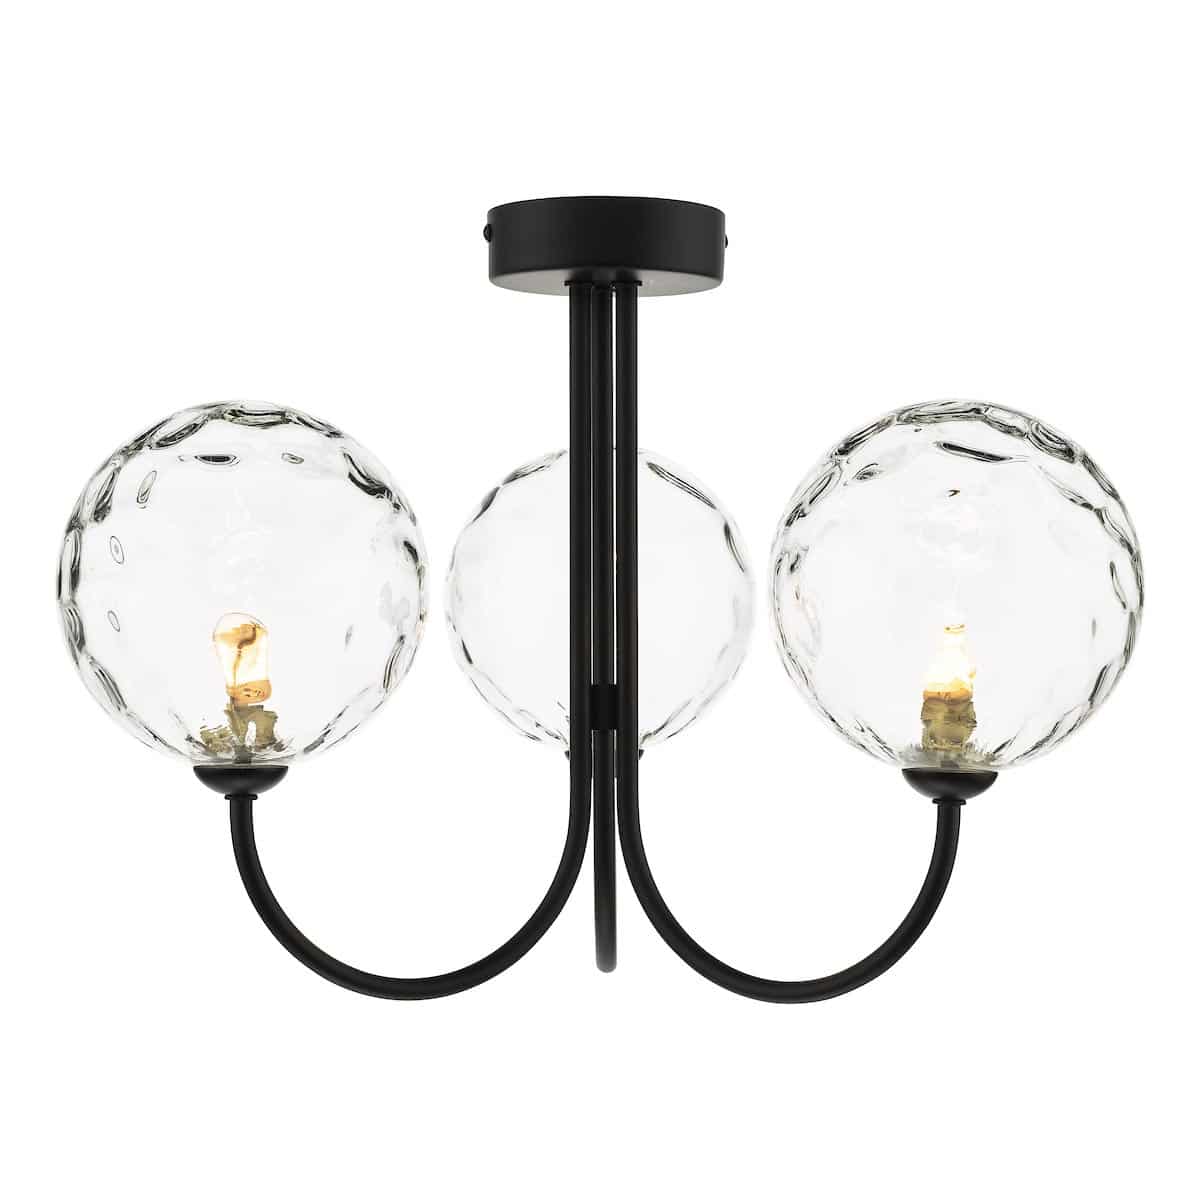 Dar Jared 3 Arm Low Ceiling Light Black Clear Dimpled Glass